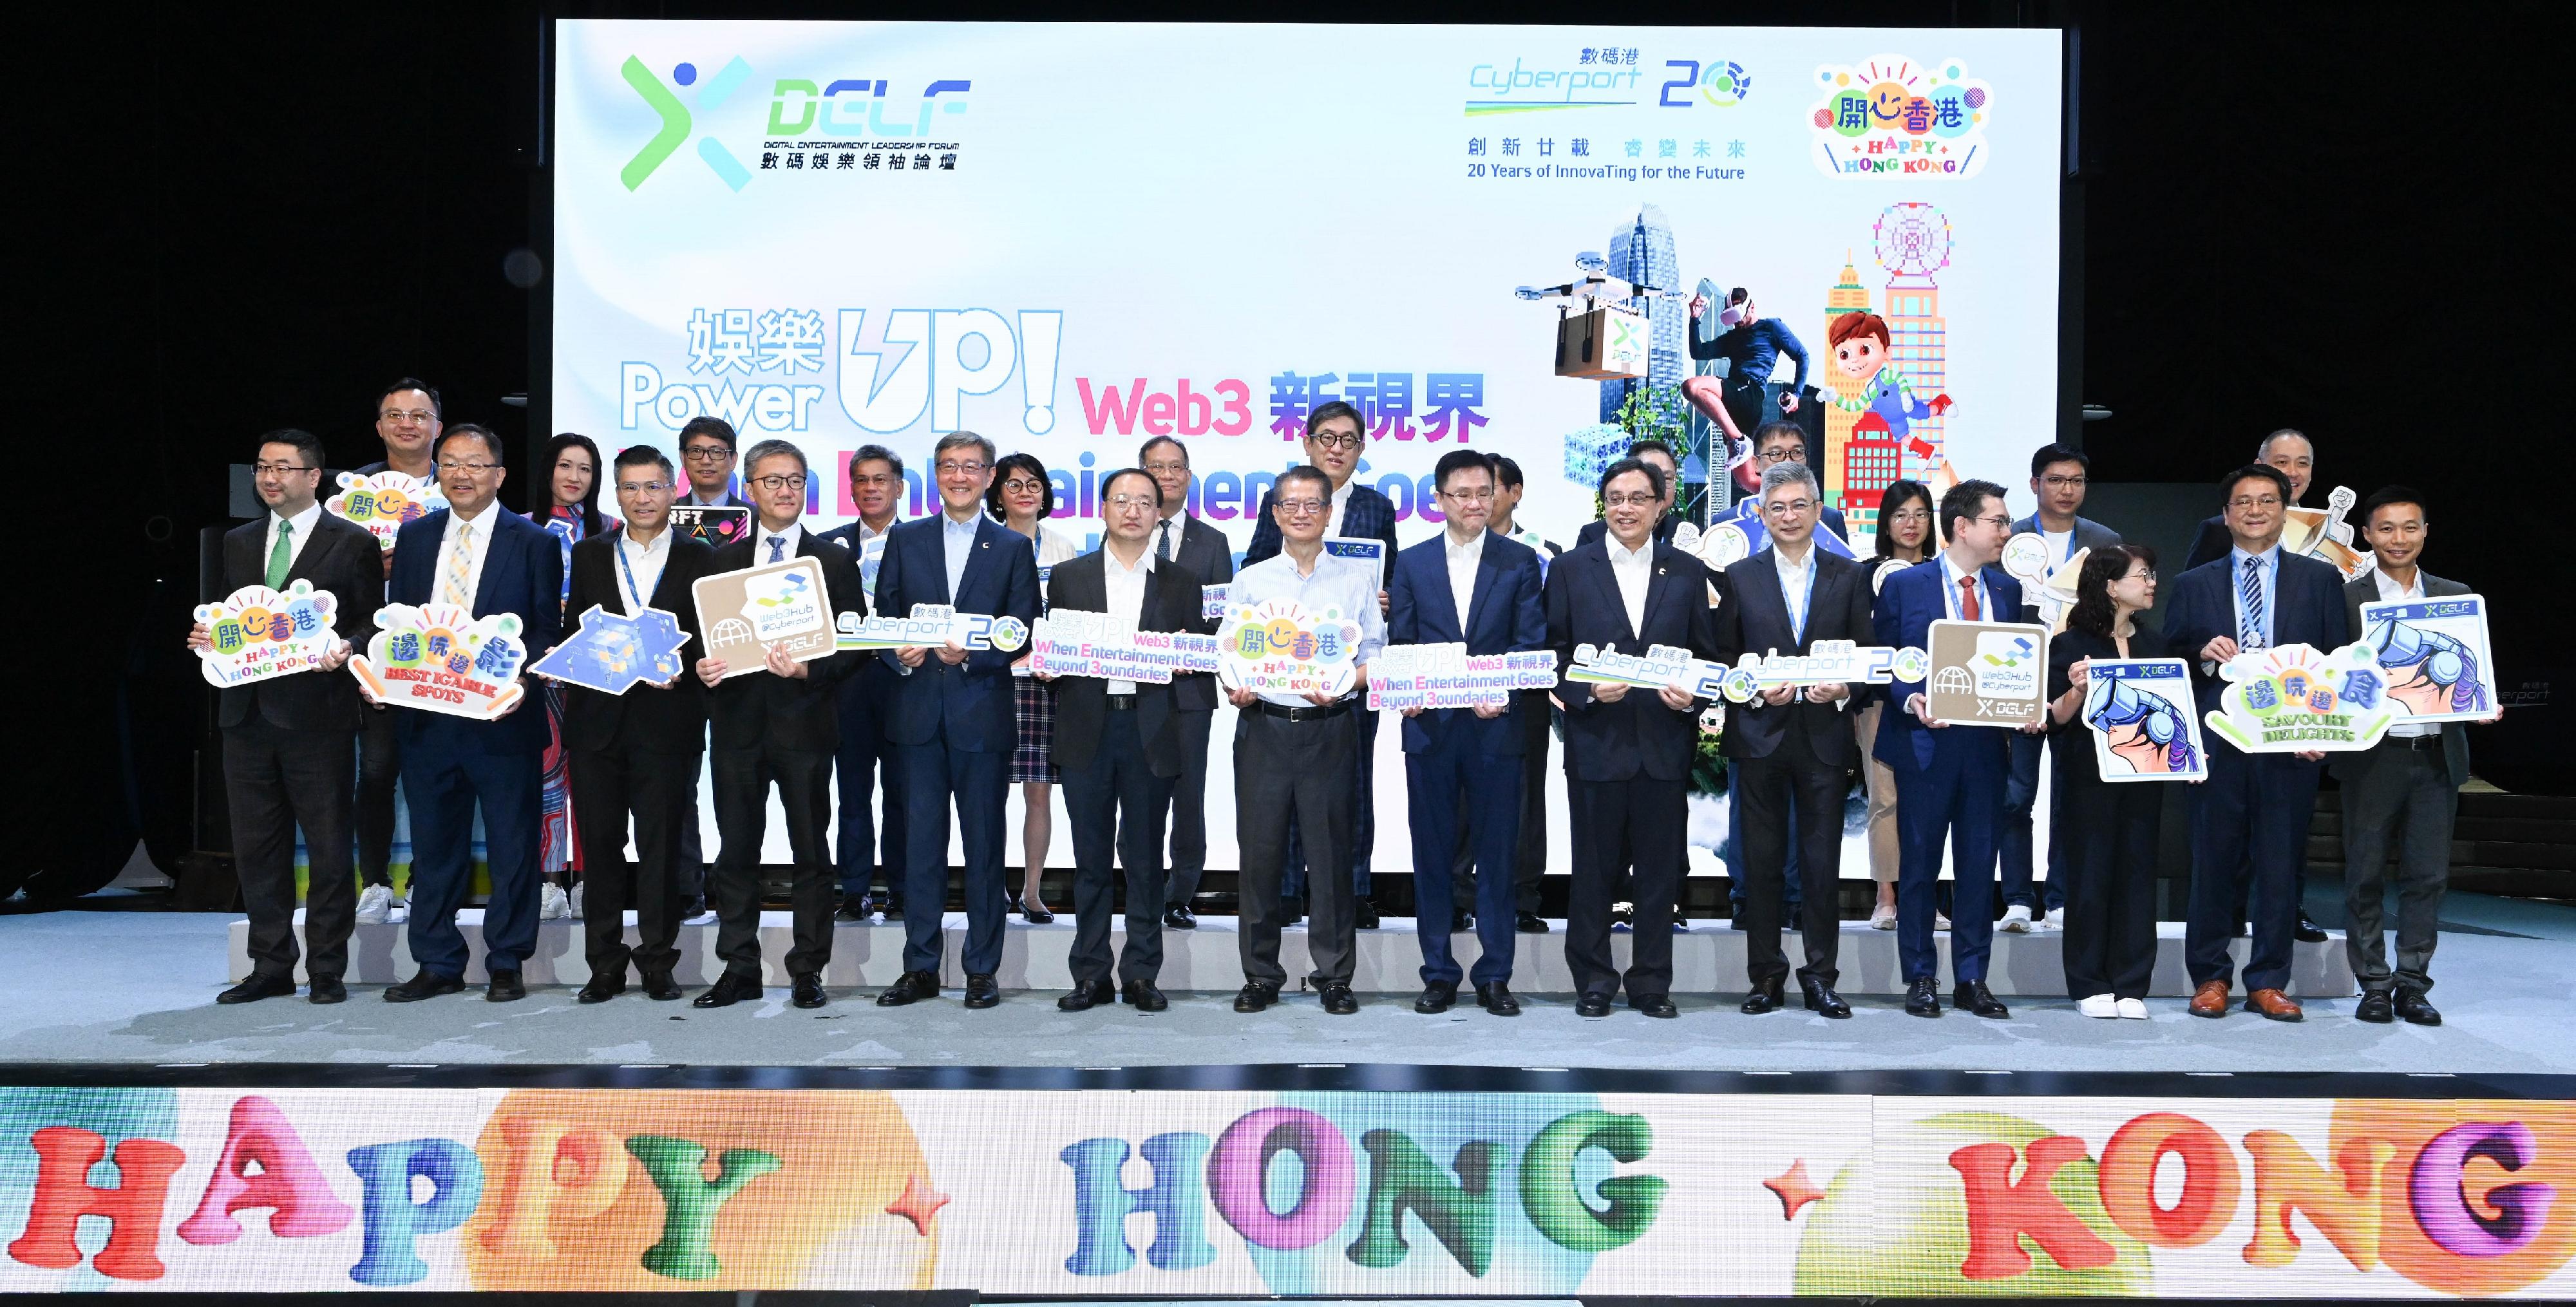 The Financial Secretary, Mr Paul Chan, attended the Digital Entertainment Leadership Forum 2023 today (August 25). Photo shows (front row, from fifth left) the Chief Executive Officer of the Hong Kong Cyberport Management Company Limited, Mr Peter Yan; the Director General of the Youth Department of the Liaison Office of the Central People's Government in the Hong Kong Special Administrative Region, Mr Zhang Zhihua; Mr Paul Chan; the Secretary for Innovation, Technology and Industry, Professor Sun Dong; the Chairman of the Board of Directors of the Hong Kong Cyberport Management Company Limited, Mr Simon Chan, and other guests at the forum.